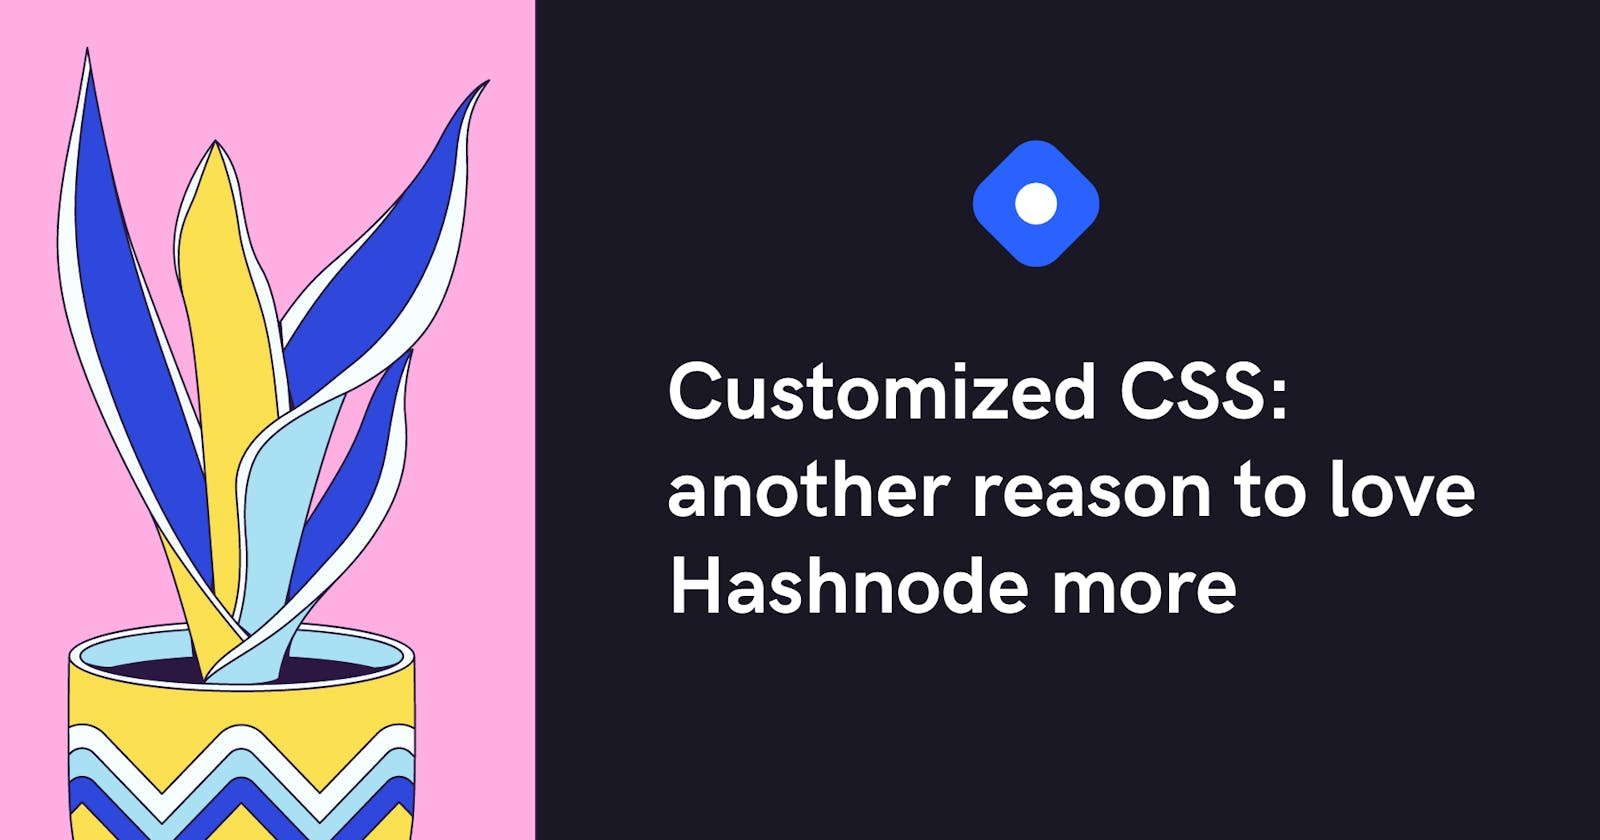 Customized CSS: another reason to love Hashnode more